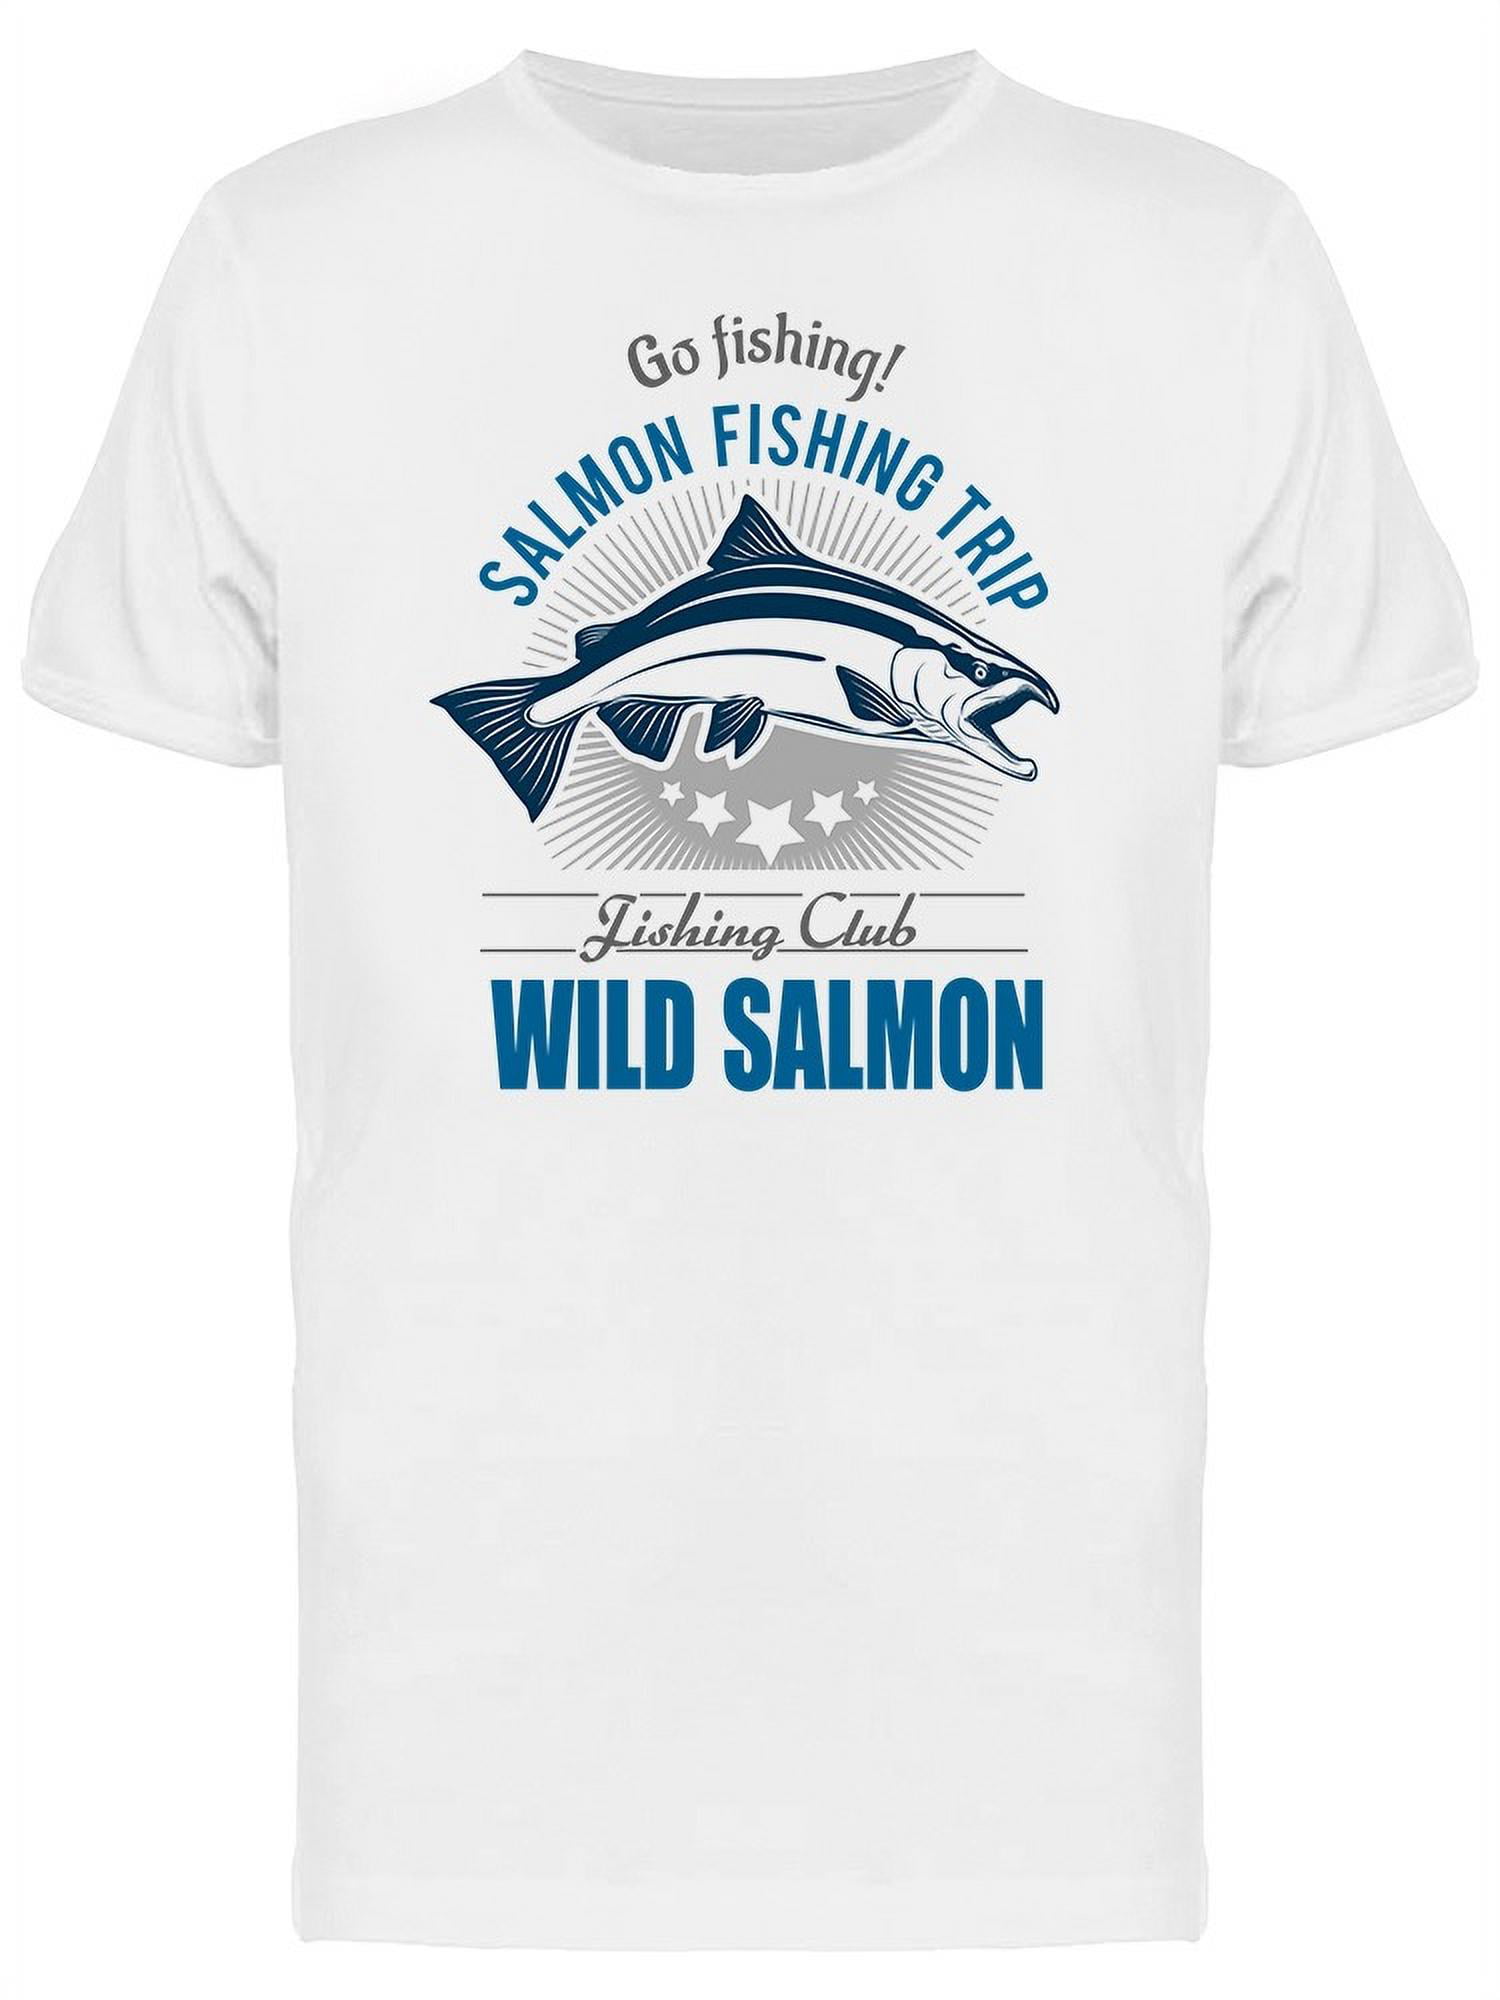 Vintage Salmon Fishing T-Shirt Men -Image by Shutterstock, Male Small